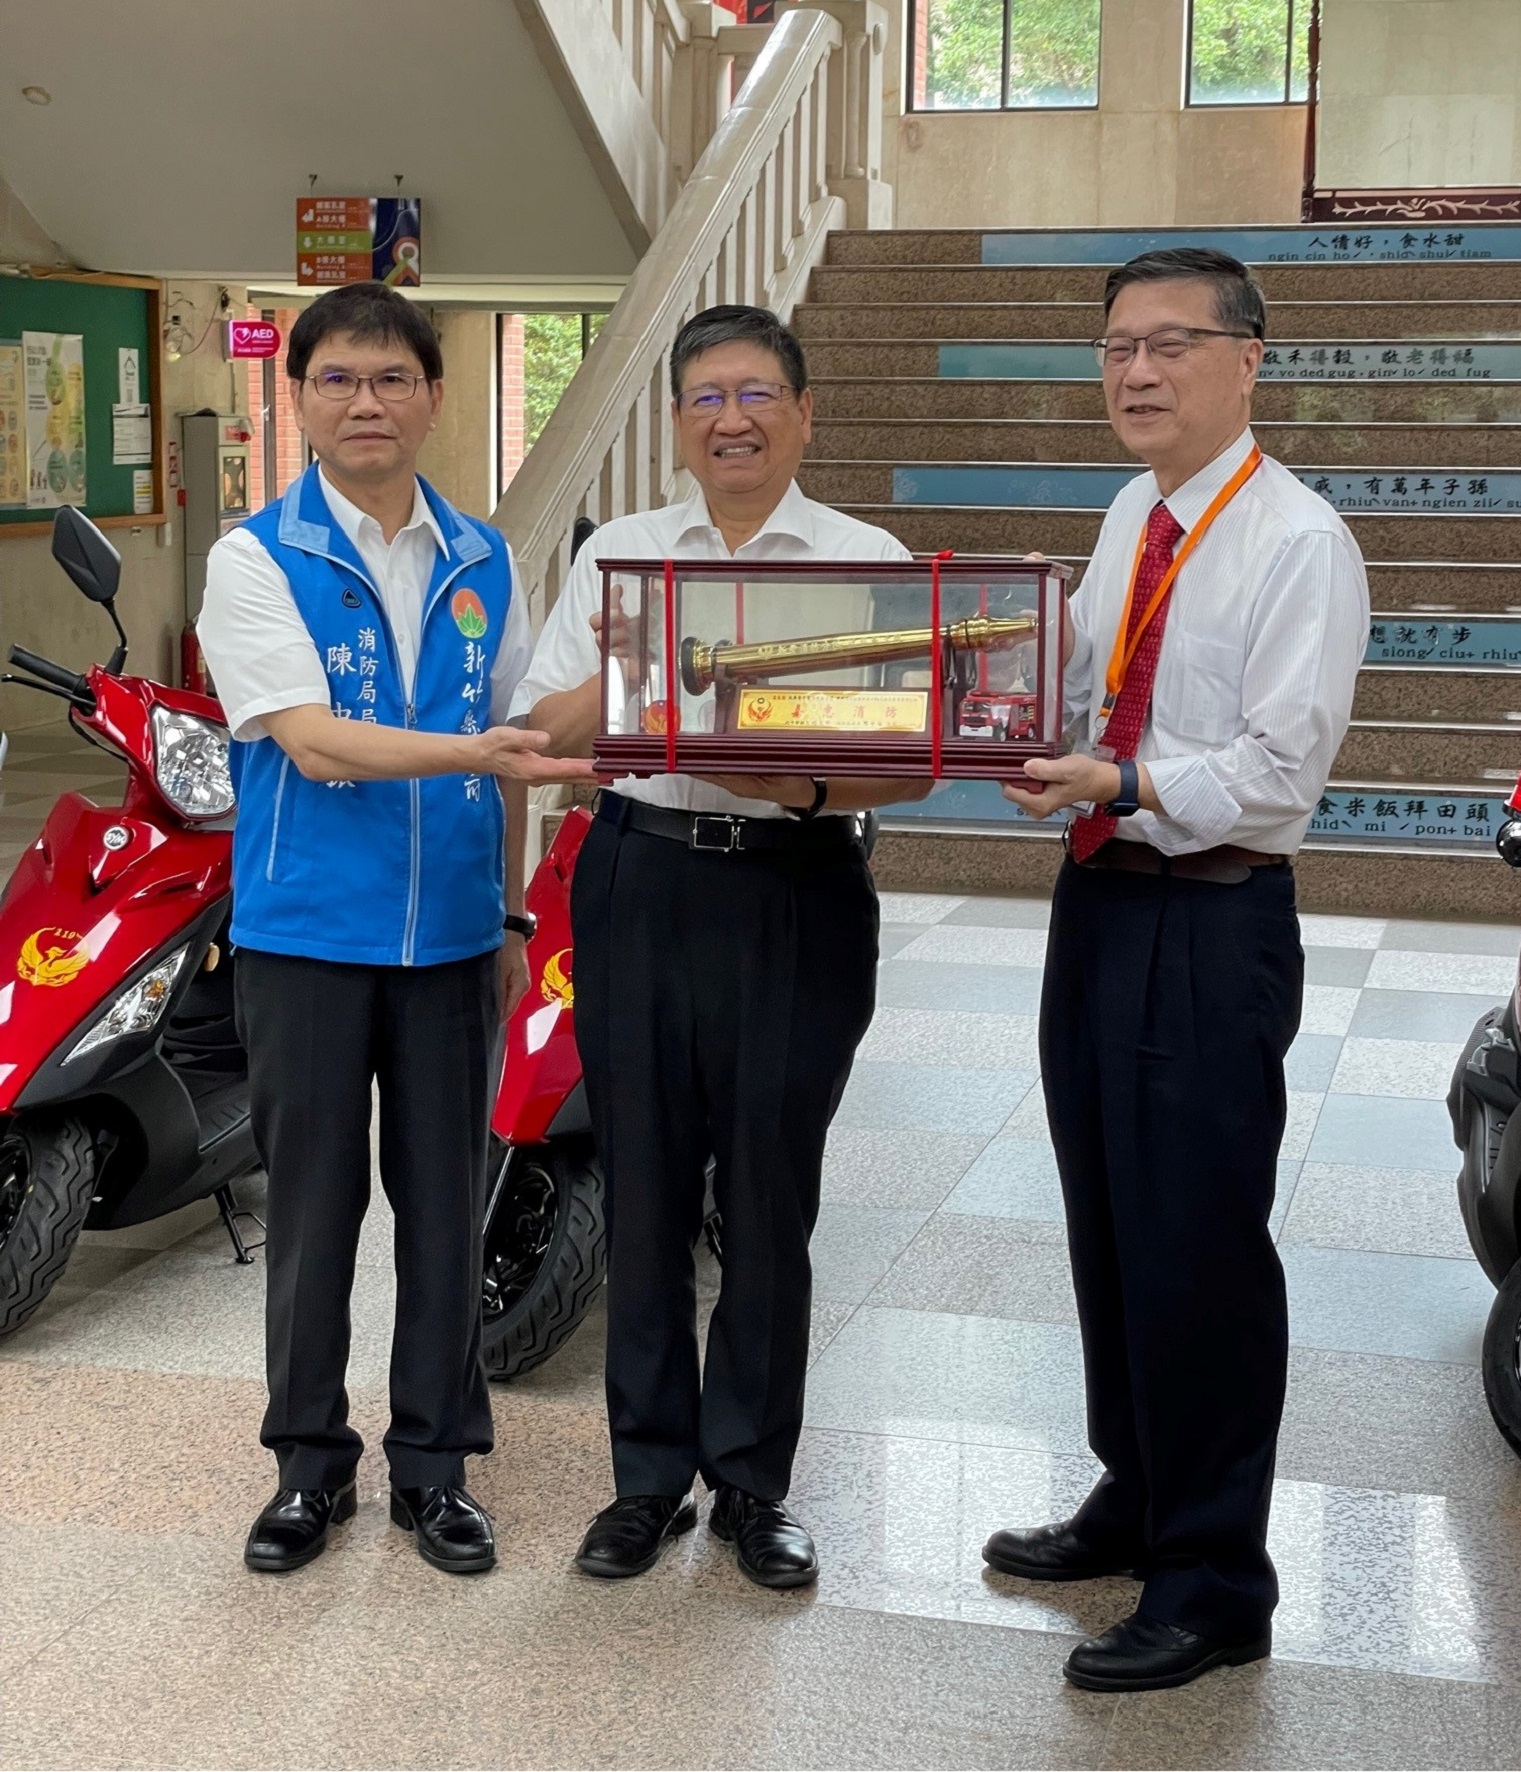 The Executive President of Unimicron, Mr. Lee Chia-Pin (the 1st one from the right), received a gift in return from the Hsinchu County Government Fire Bureau.